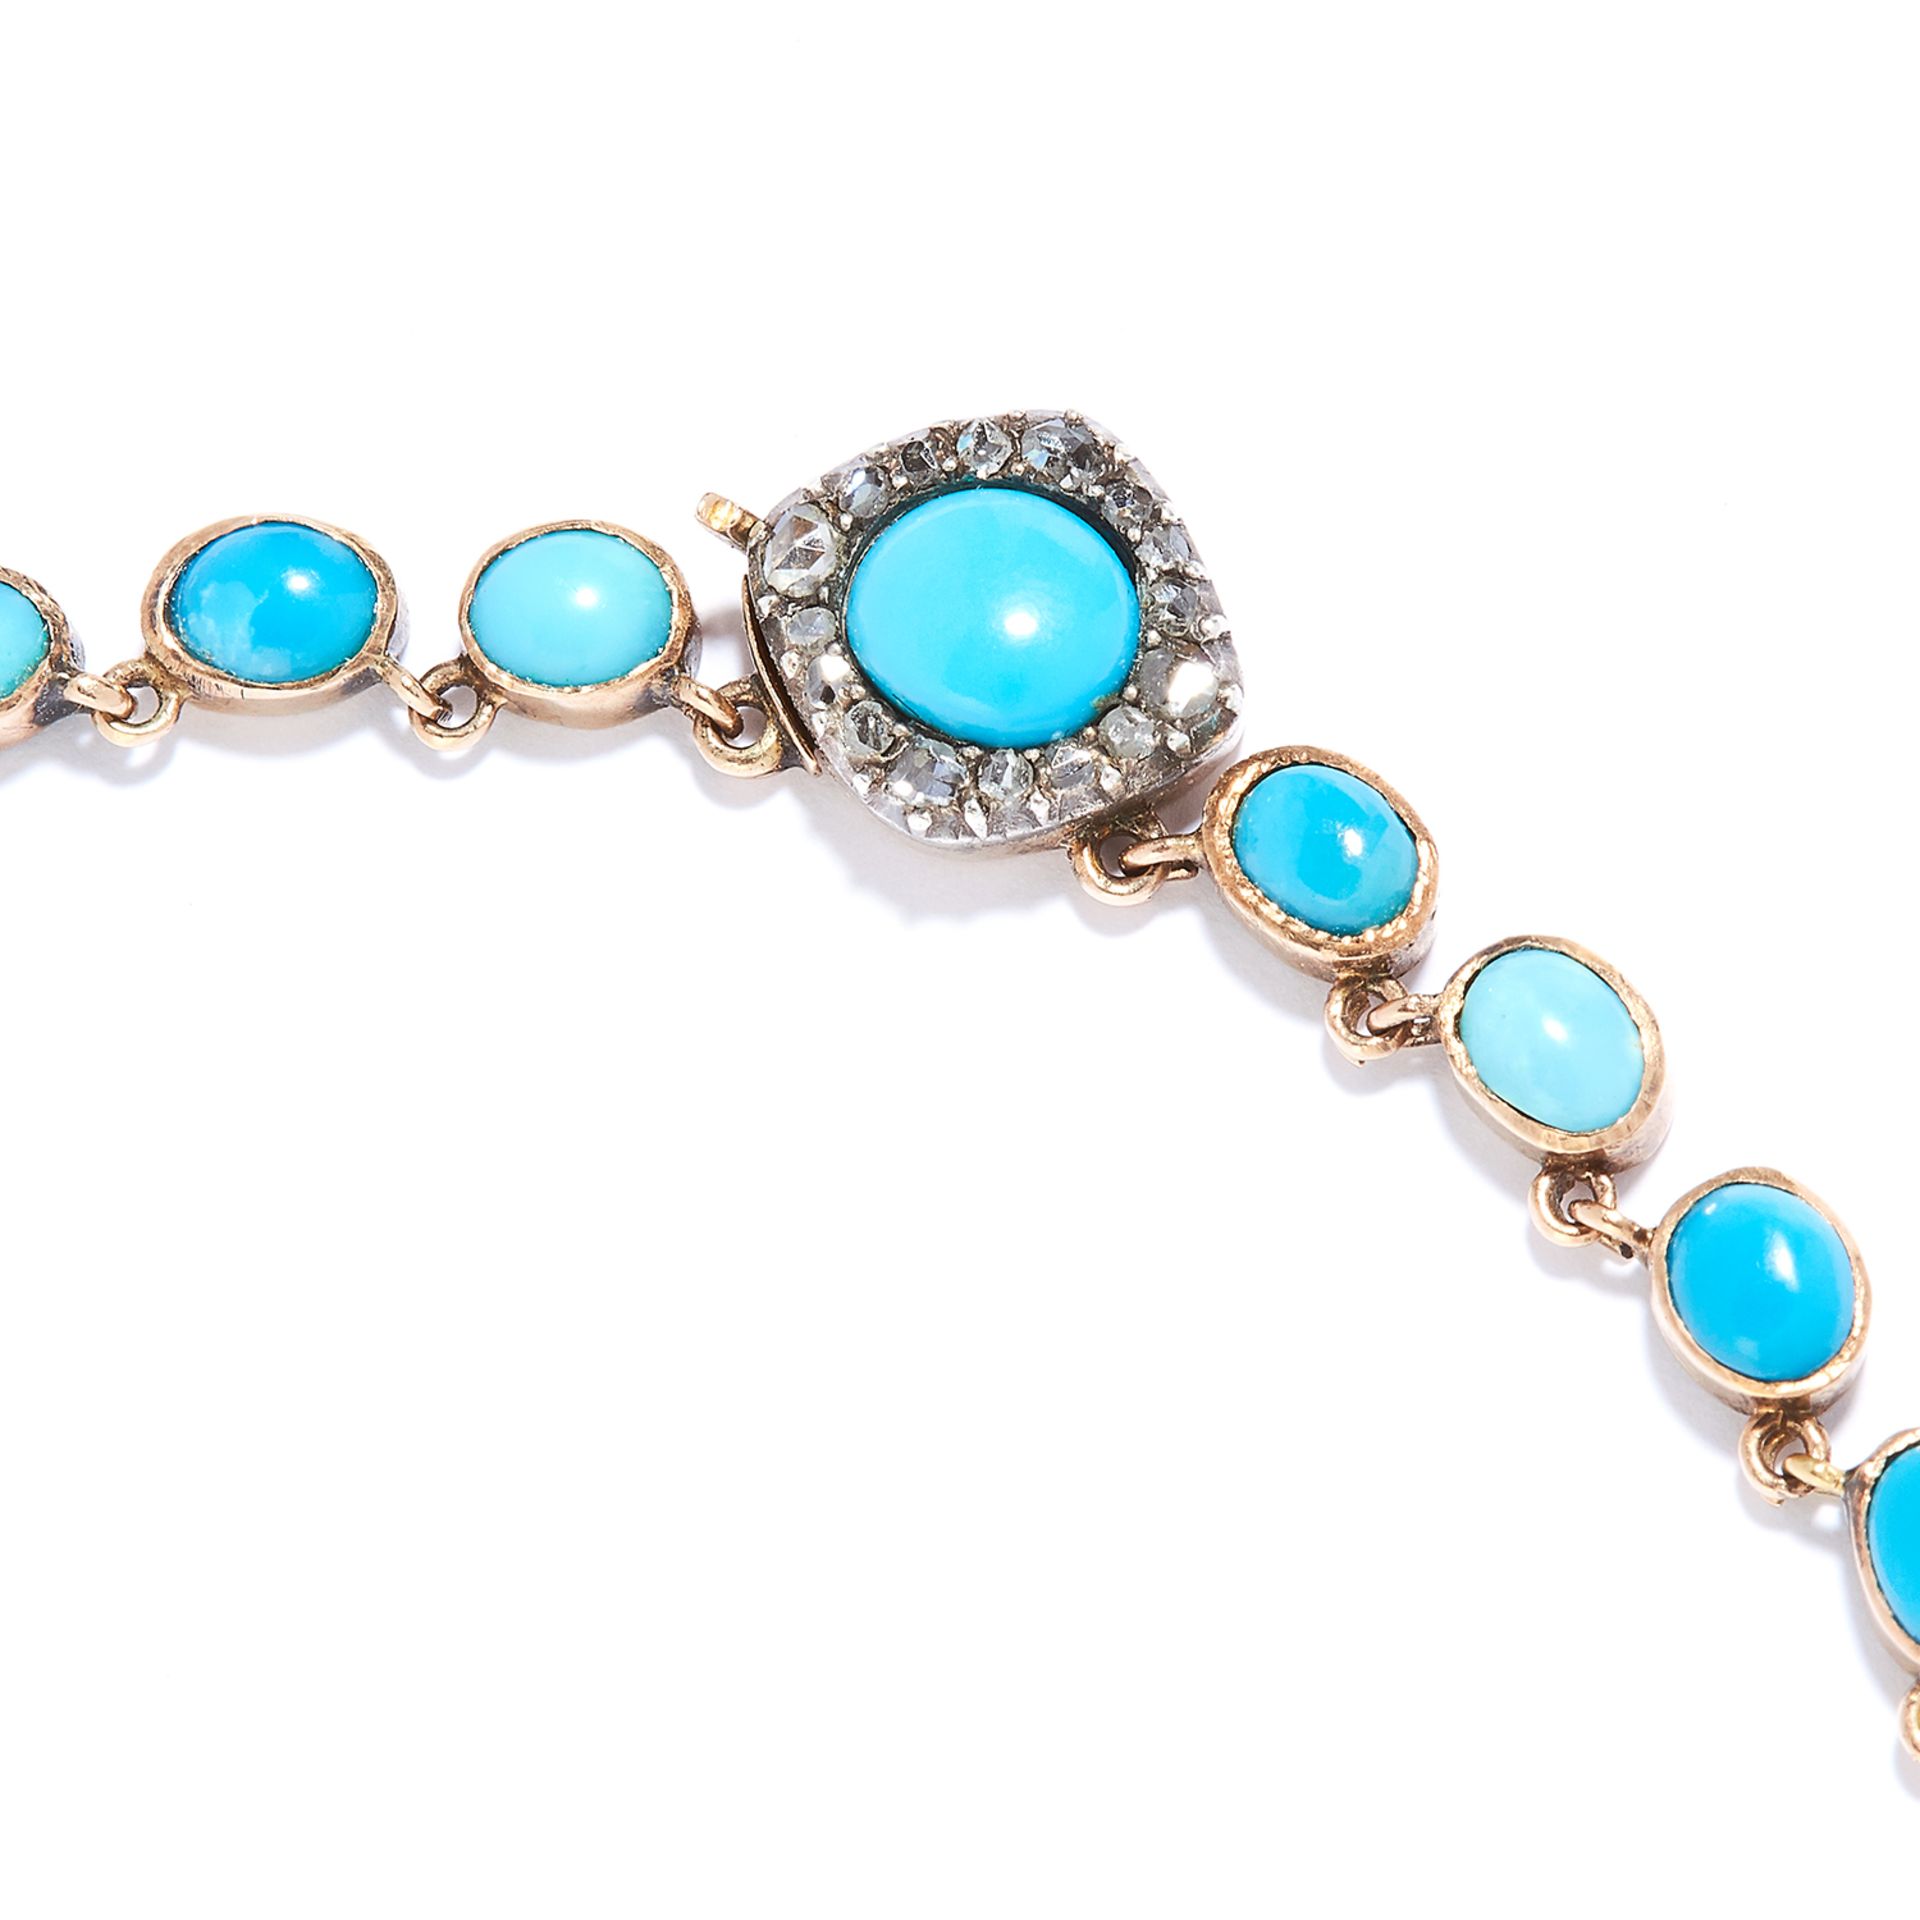 ANTIQUE TURQUOISE AND DIAMOND RIVIERA NECKLACE, 19TH CENTURY in high carat yellow gold, set with - Bild 2 aus 2